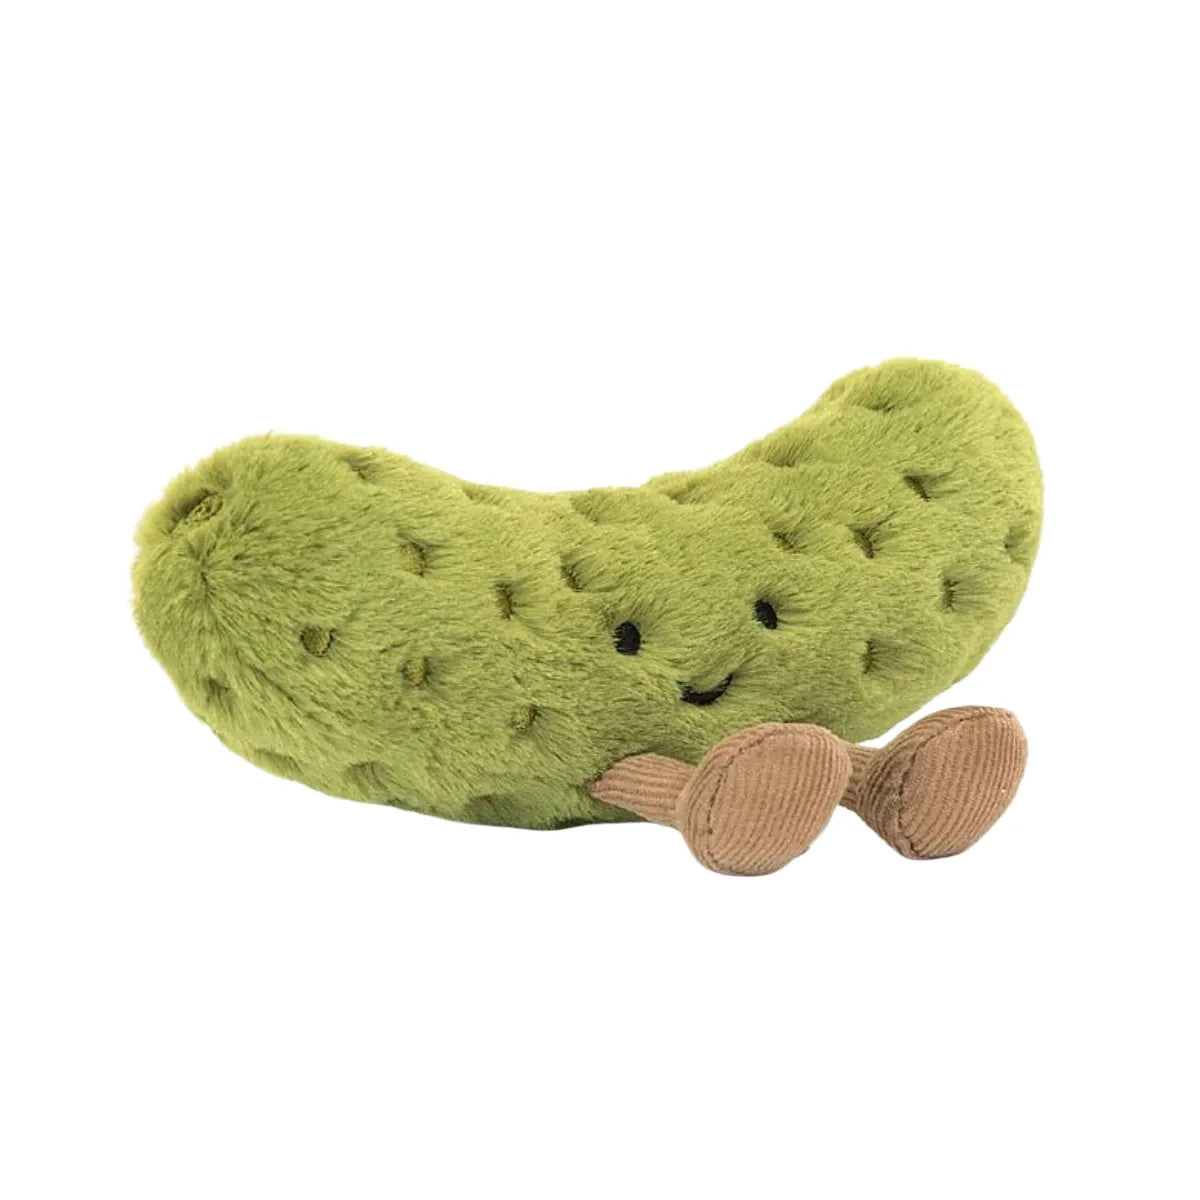 Amuseable Pickle cucumber plush toy